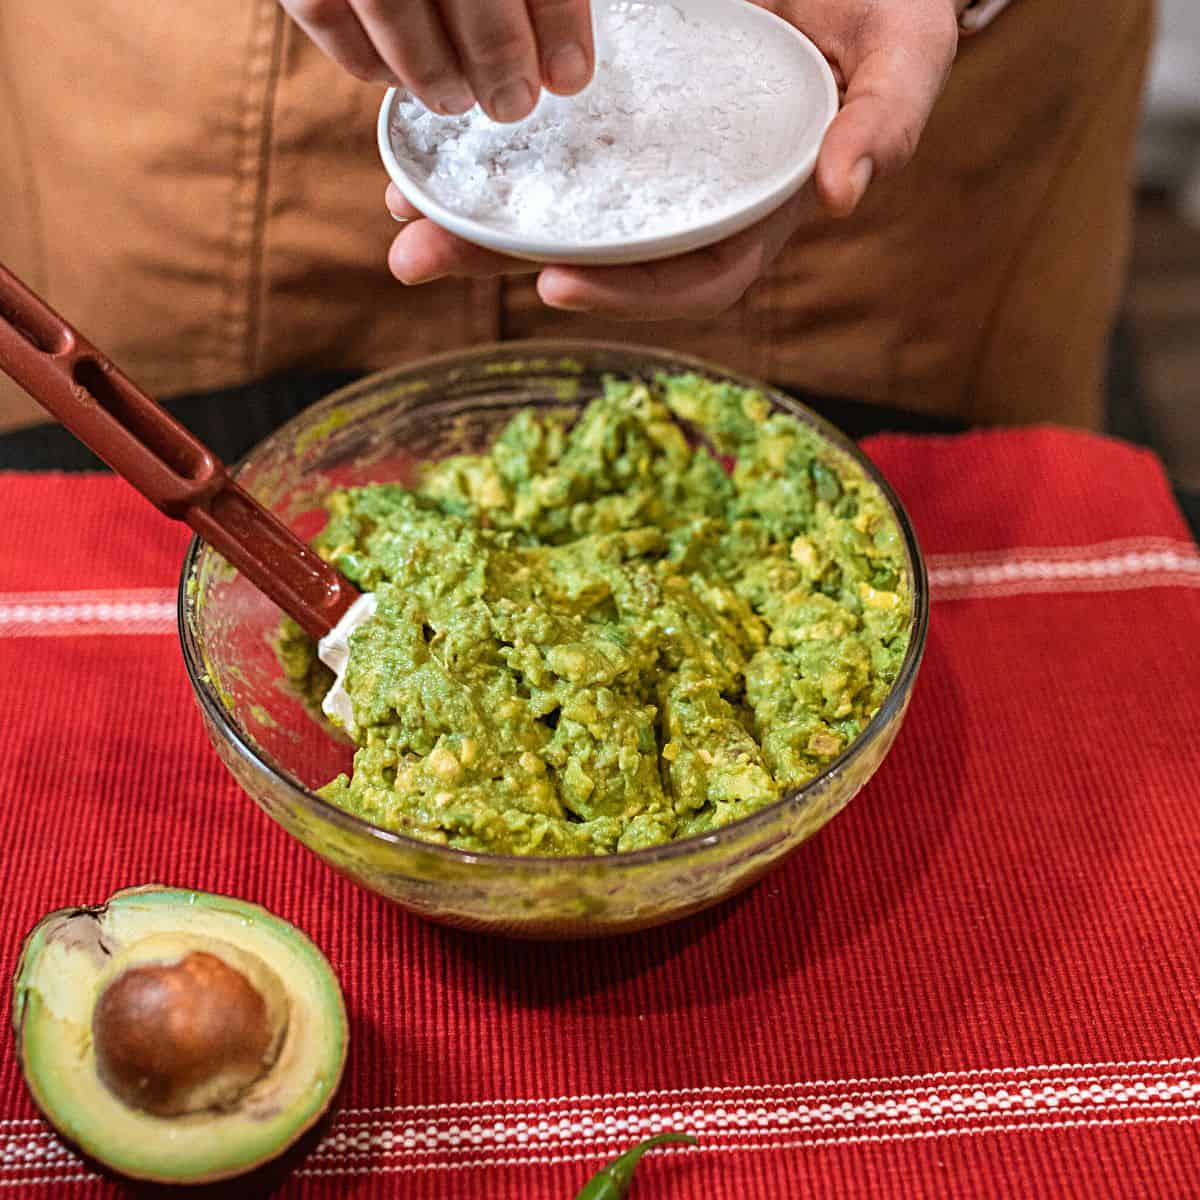 bowl of guac getting salt mixed in - Guacamole is keto & Here's Why with Recipes